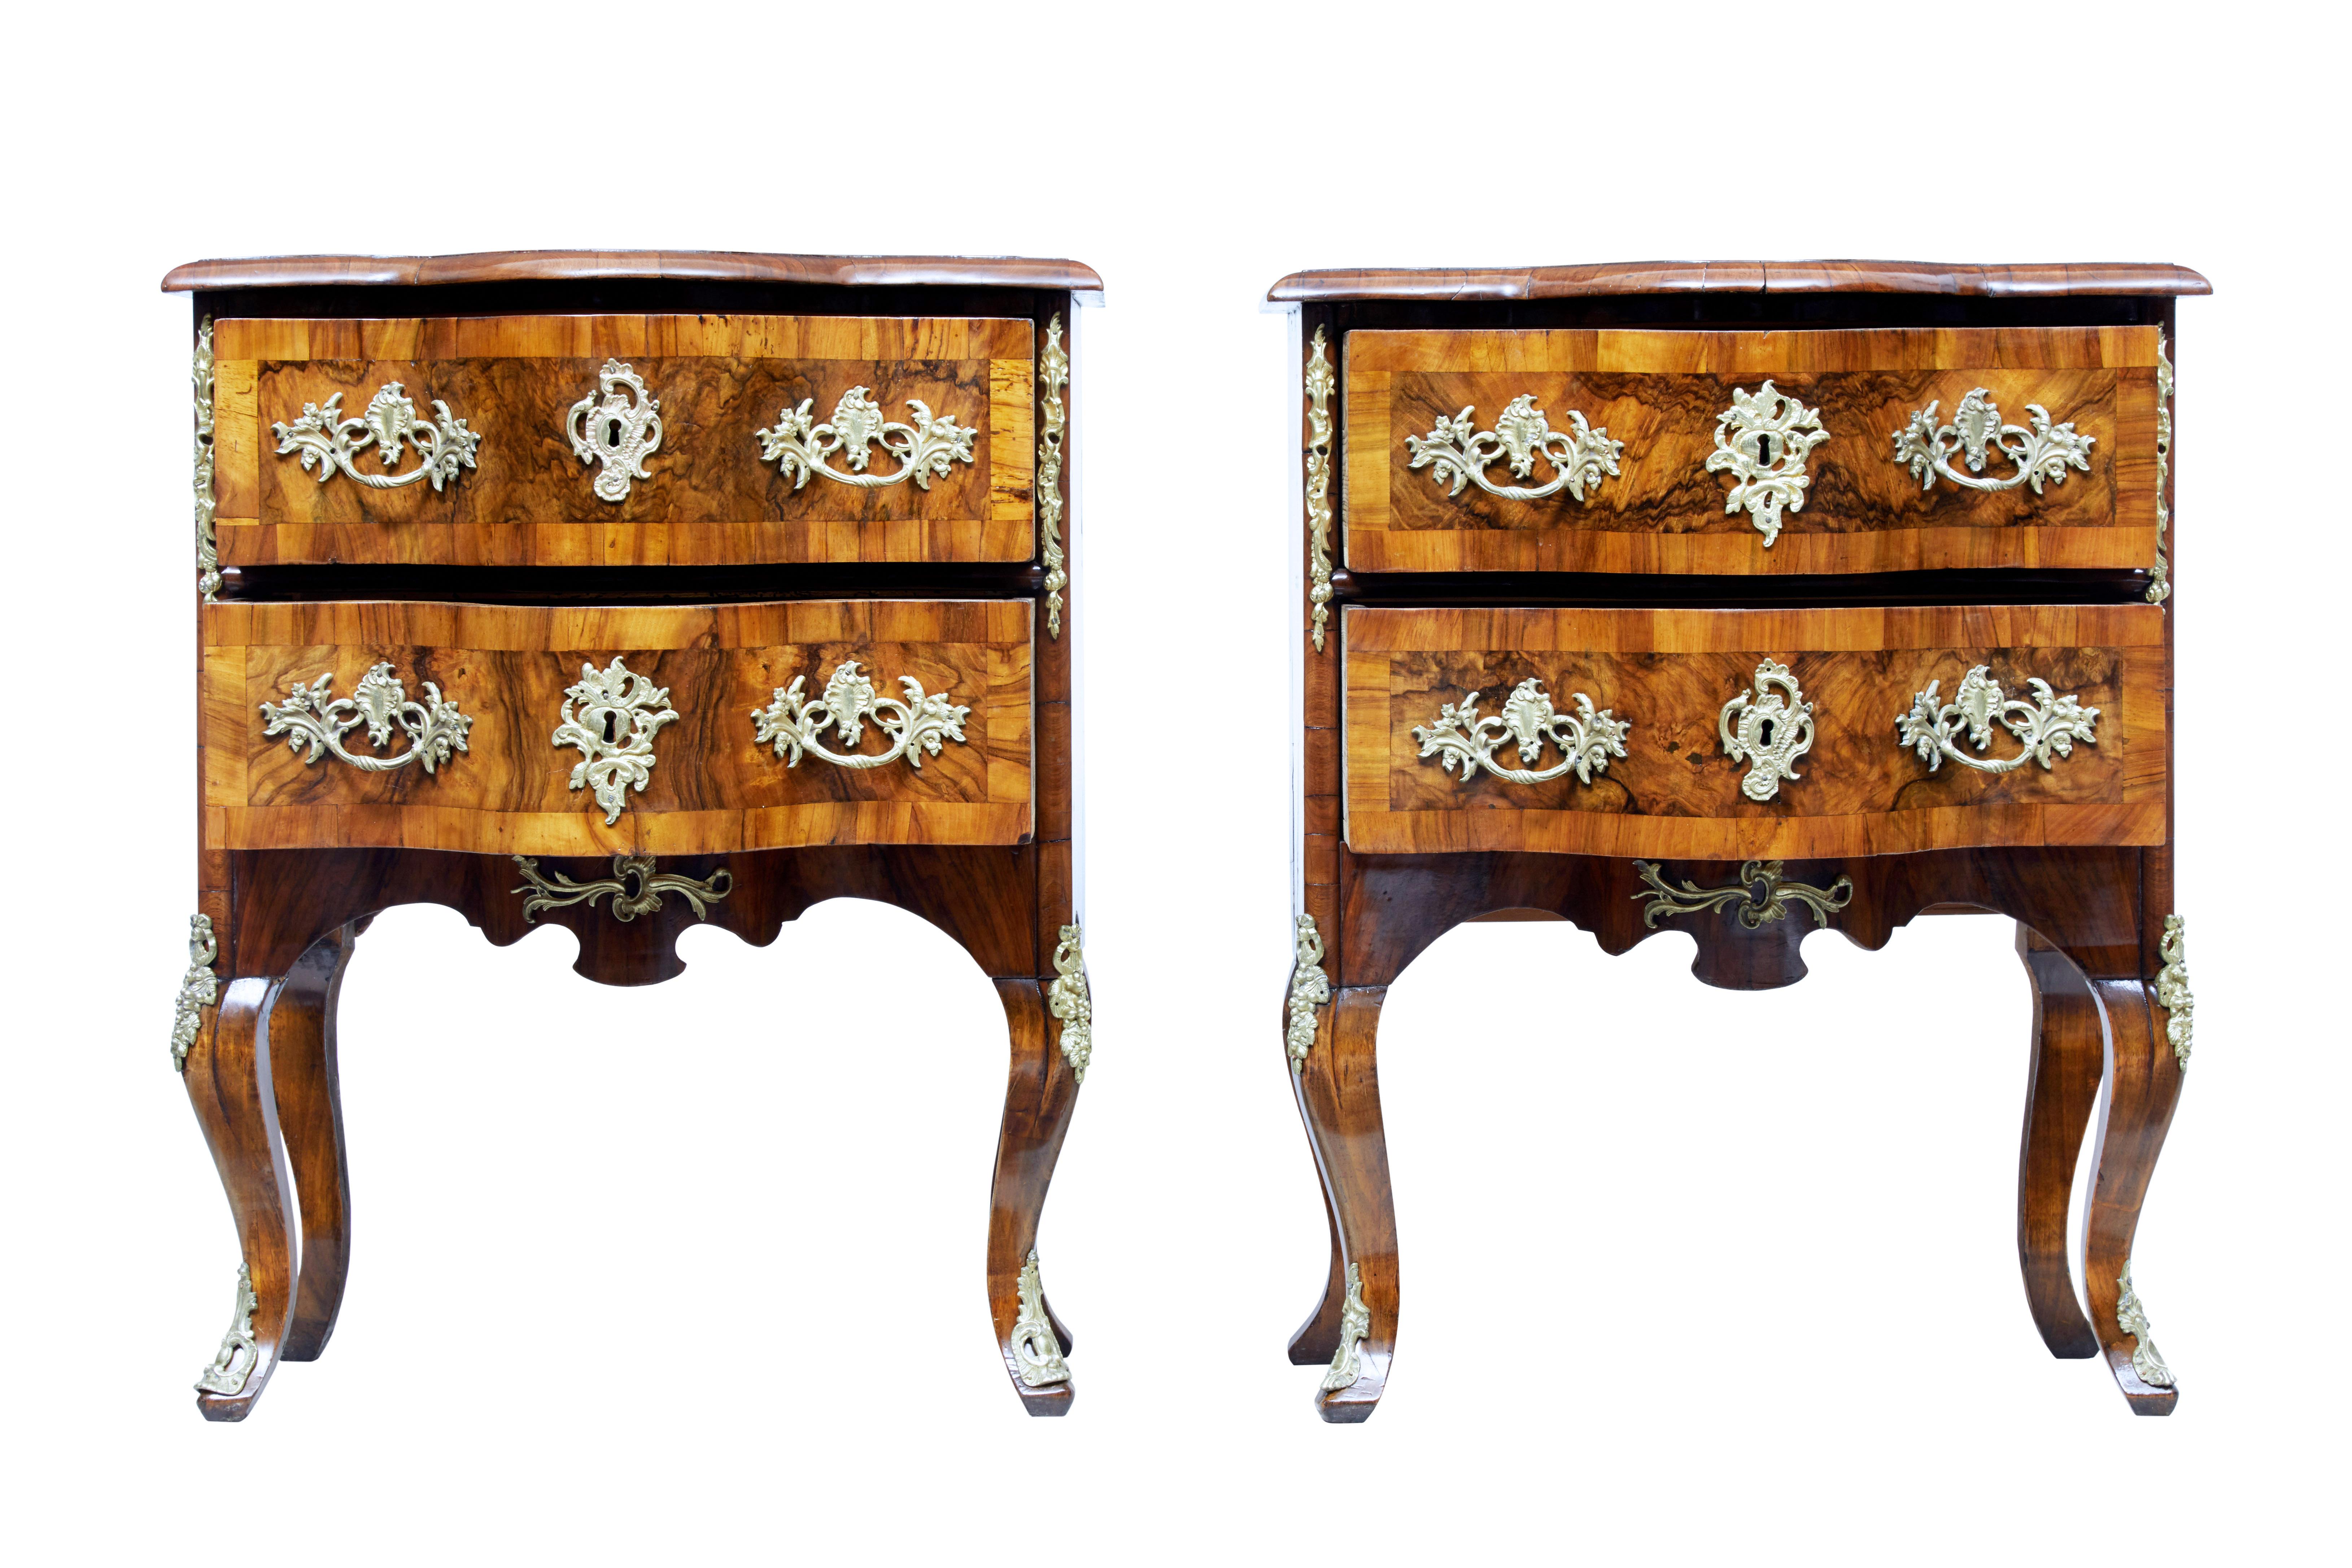 Fine pair of German walnut serpentine commodes, circa 1860.

2 drawers fitted with ornate ormolu handles. Escutcheon and further mounts to sides and legs.

Top surface with segmented walnut veneers with burr cross banding. Burr drawer fronts